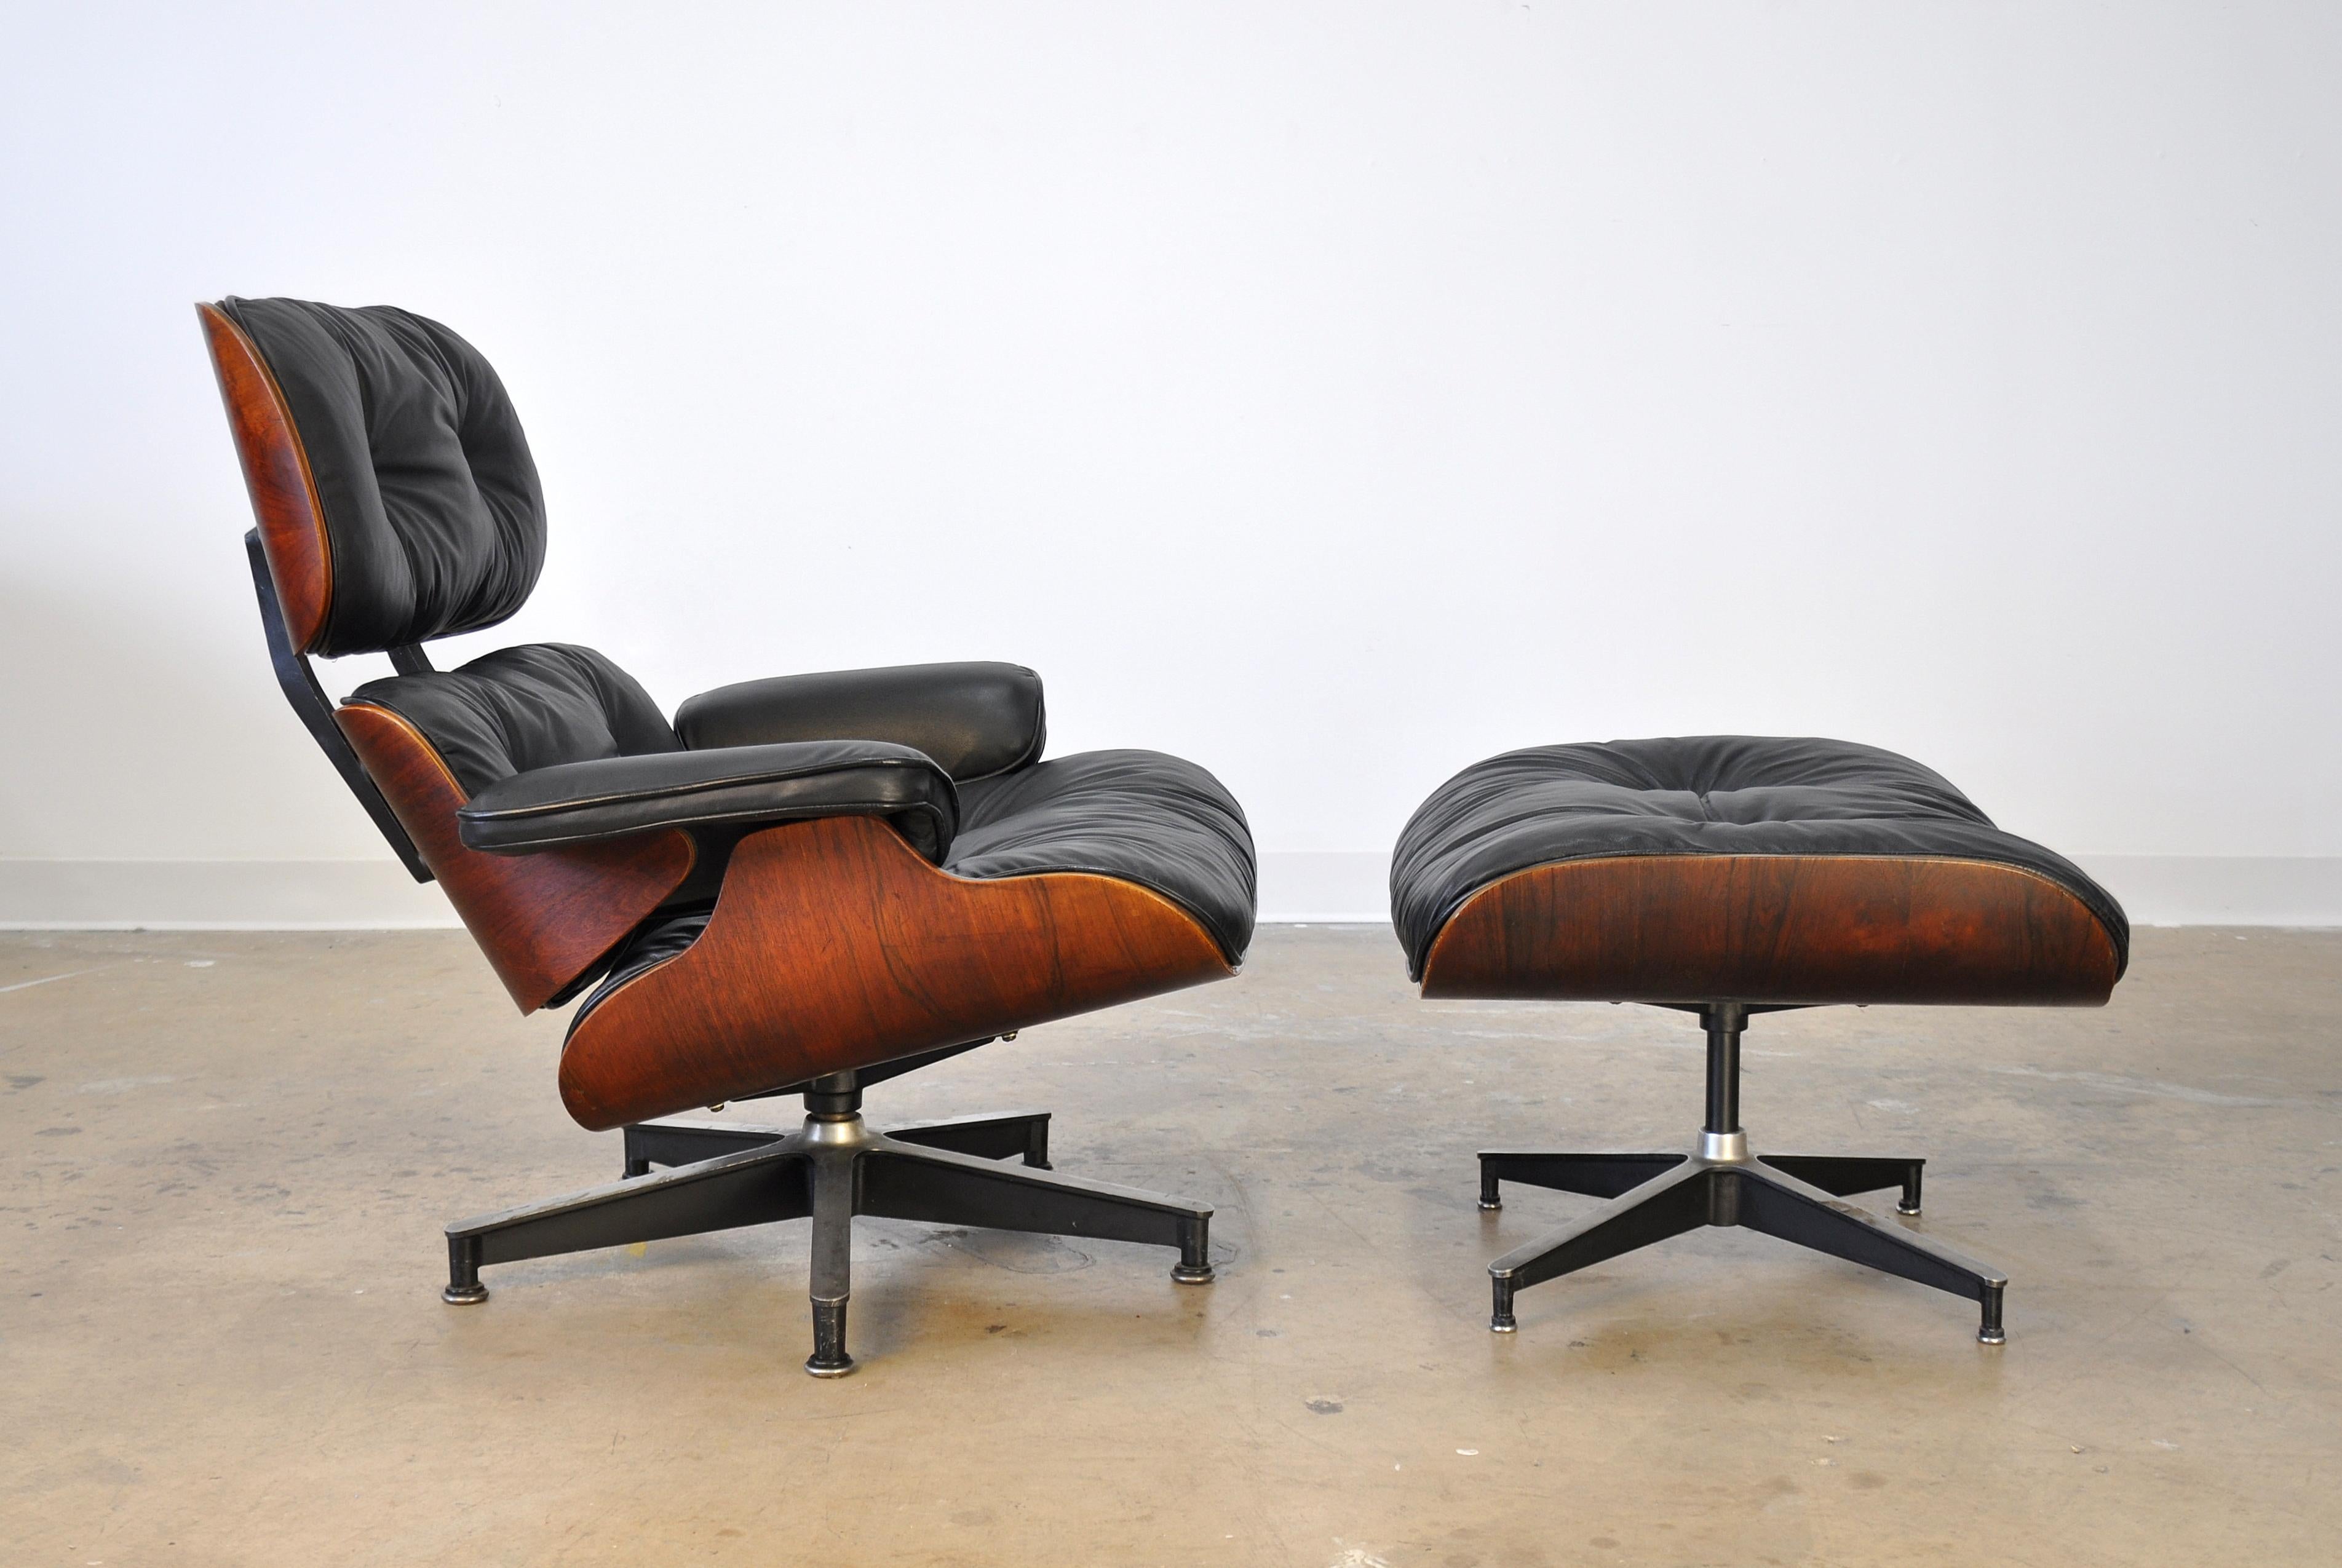 Iconic Mid-Century Modern black leather 670 lounge and 671 ottoman designed by Ray and Charles Eames for Herman Miller, dating from circa 1959. The swivel armchair and fixed footstool feature rosewood shells with tufted black leather and down